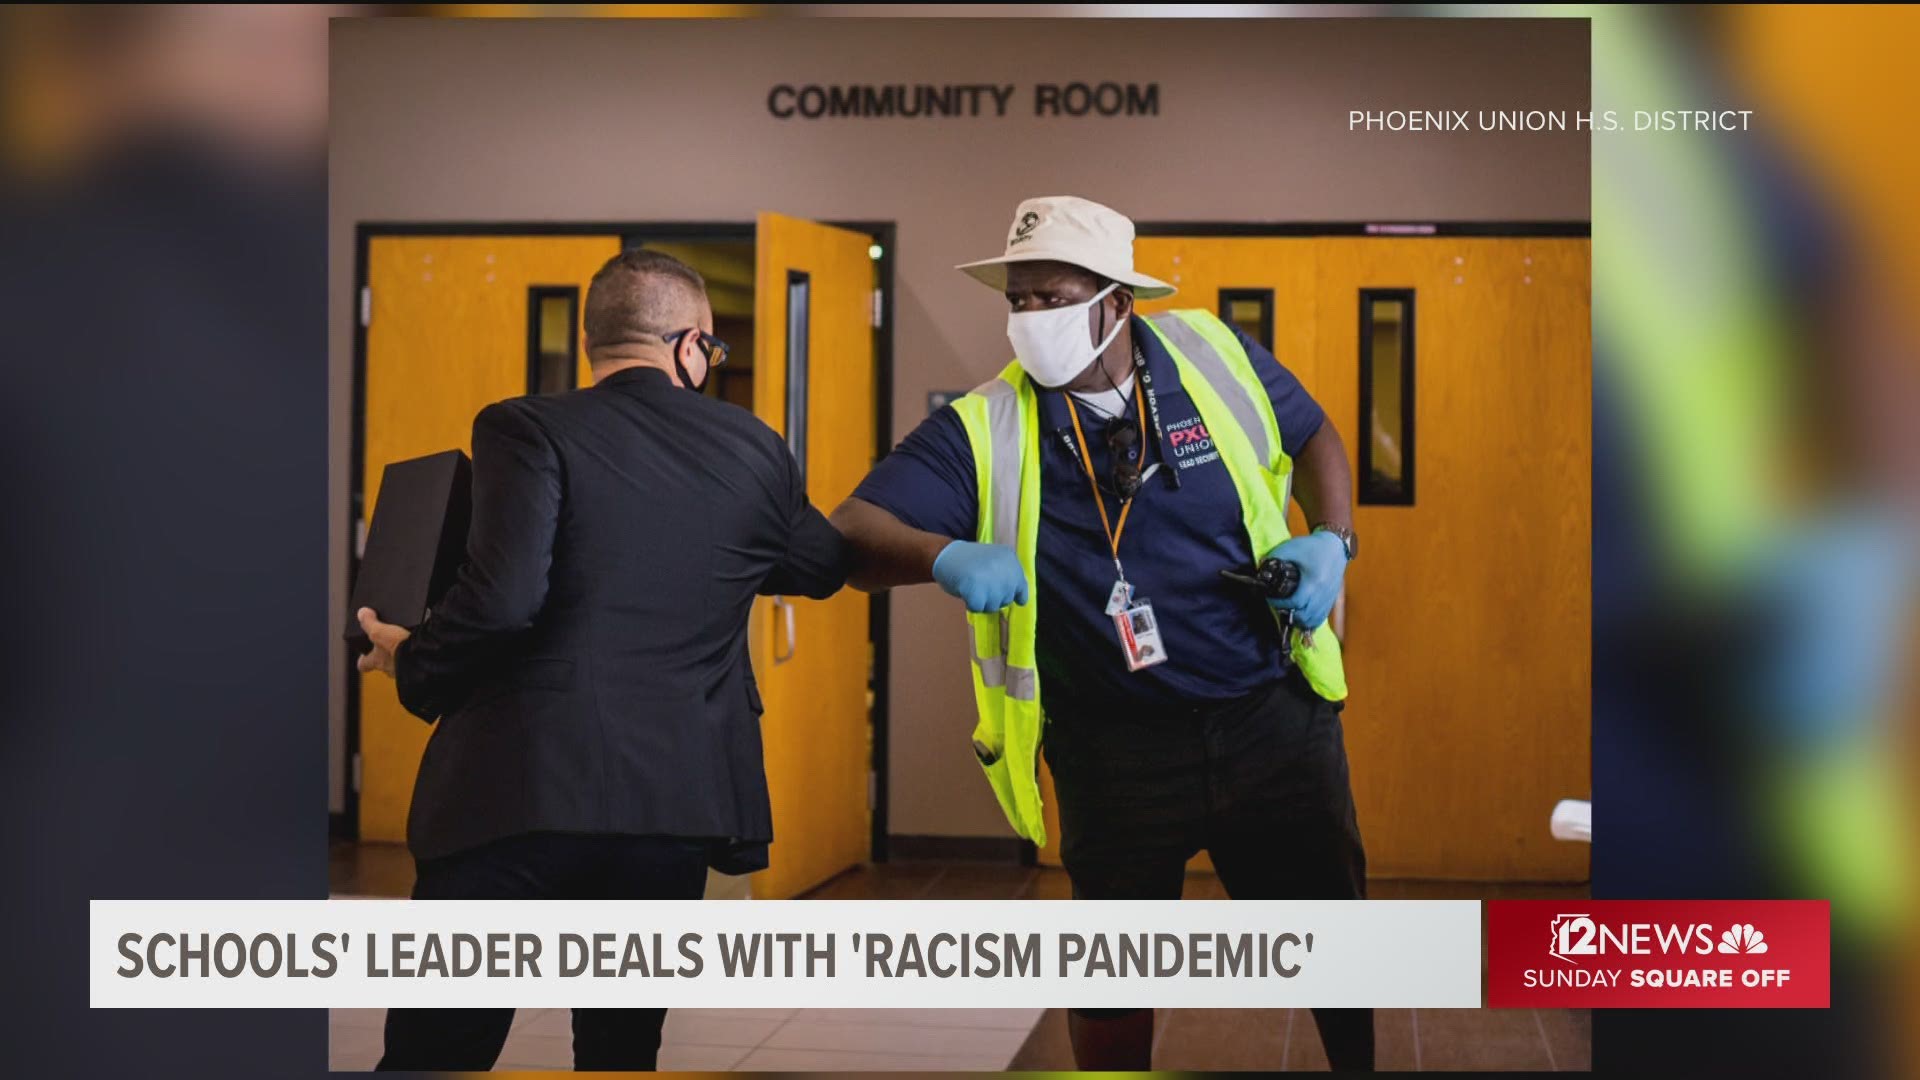 Superintendent Chad Gestson says the Phoenix Union High School District had to deal with fallout from Black Lives Matters protest while confronting the coronavirus.